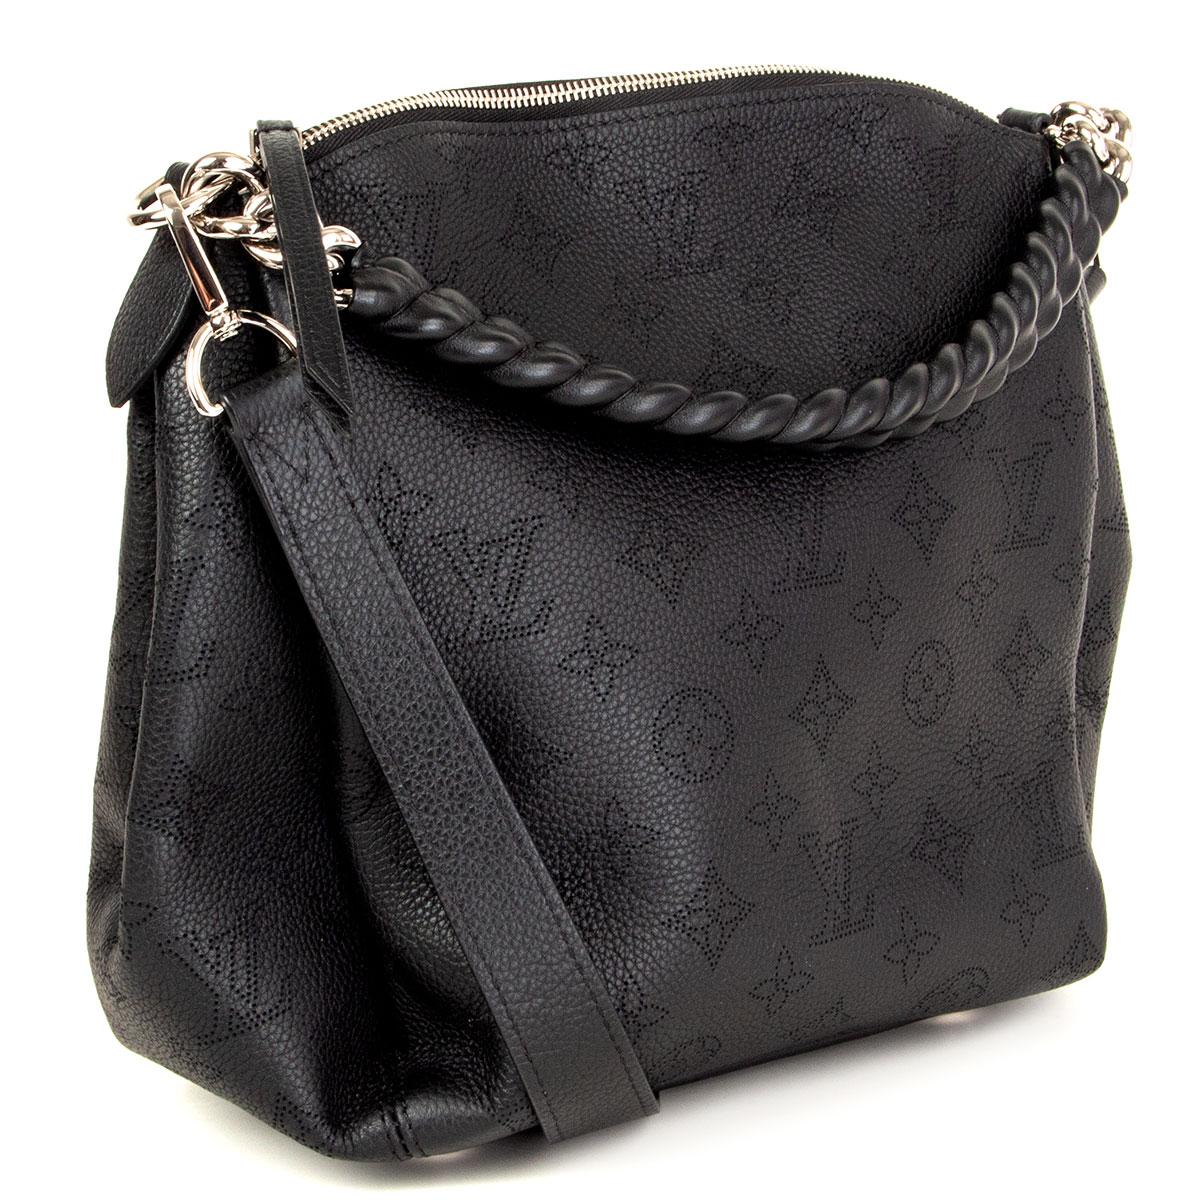 100% authentic Louis Vuitton Babylone Chain BB Shoulder Bag in smooth black subtle perforated monogram Mahina Calfskin featuring silver-tone hardware. Opens with a zipper on top and is lined in brown microfibre with one zip pocket against the back